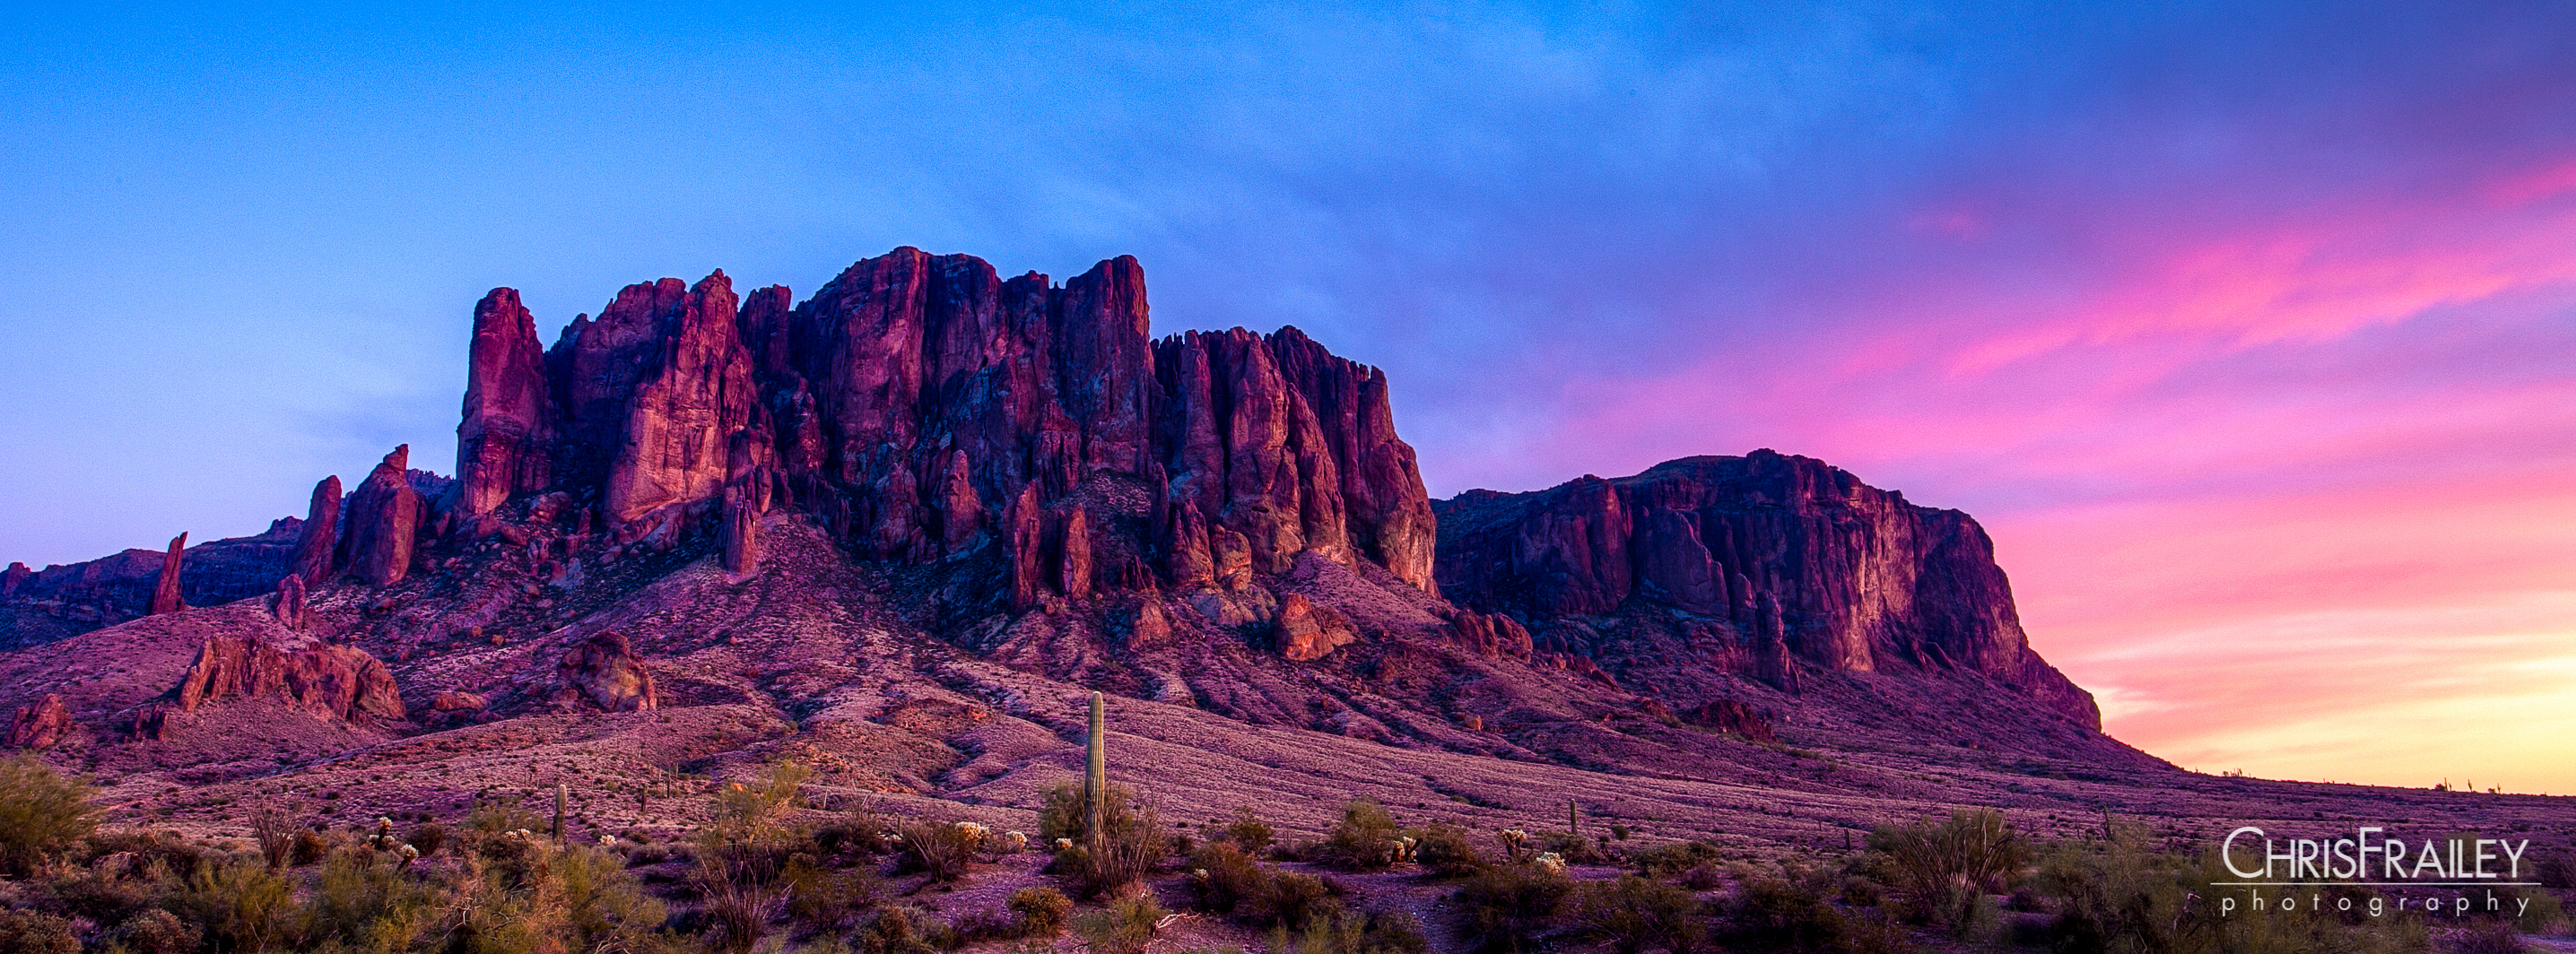 Sunset falls on the Superstition Mountains